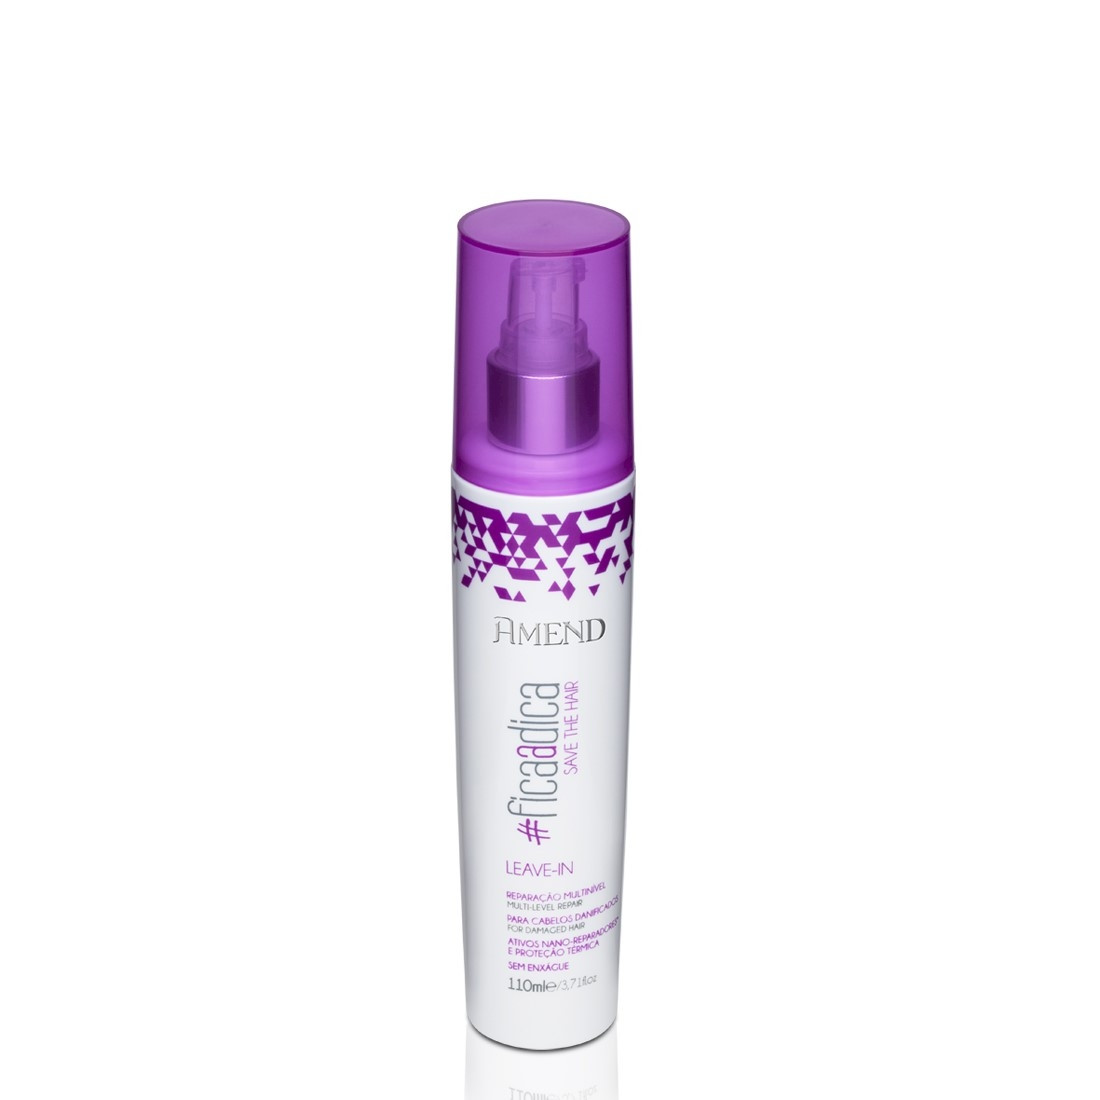 Leave-In #FICAADICA Save The Hair 110ml